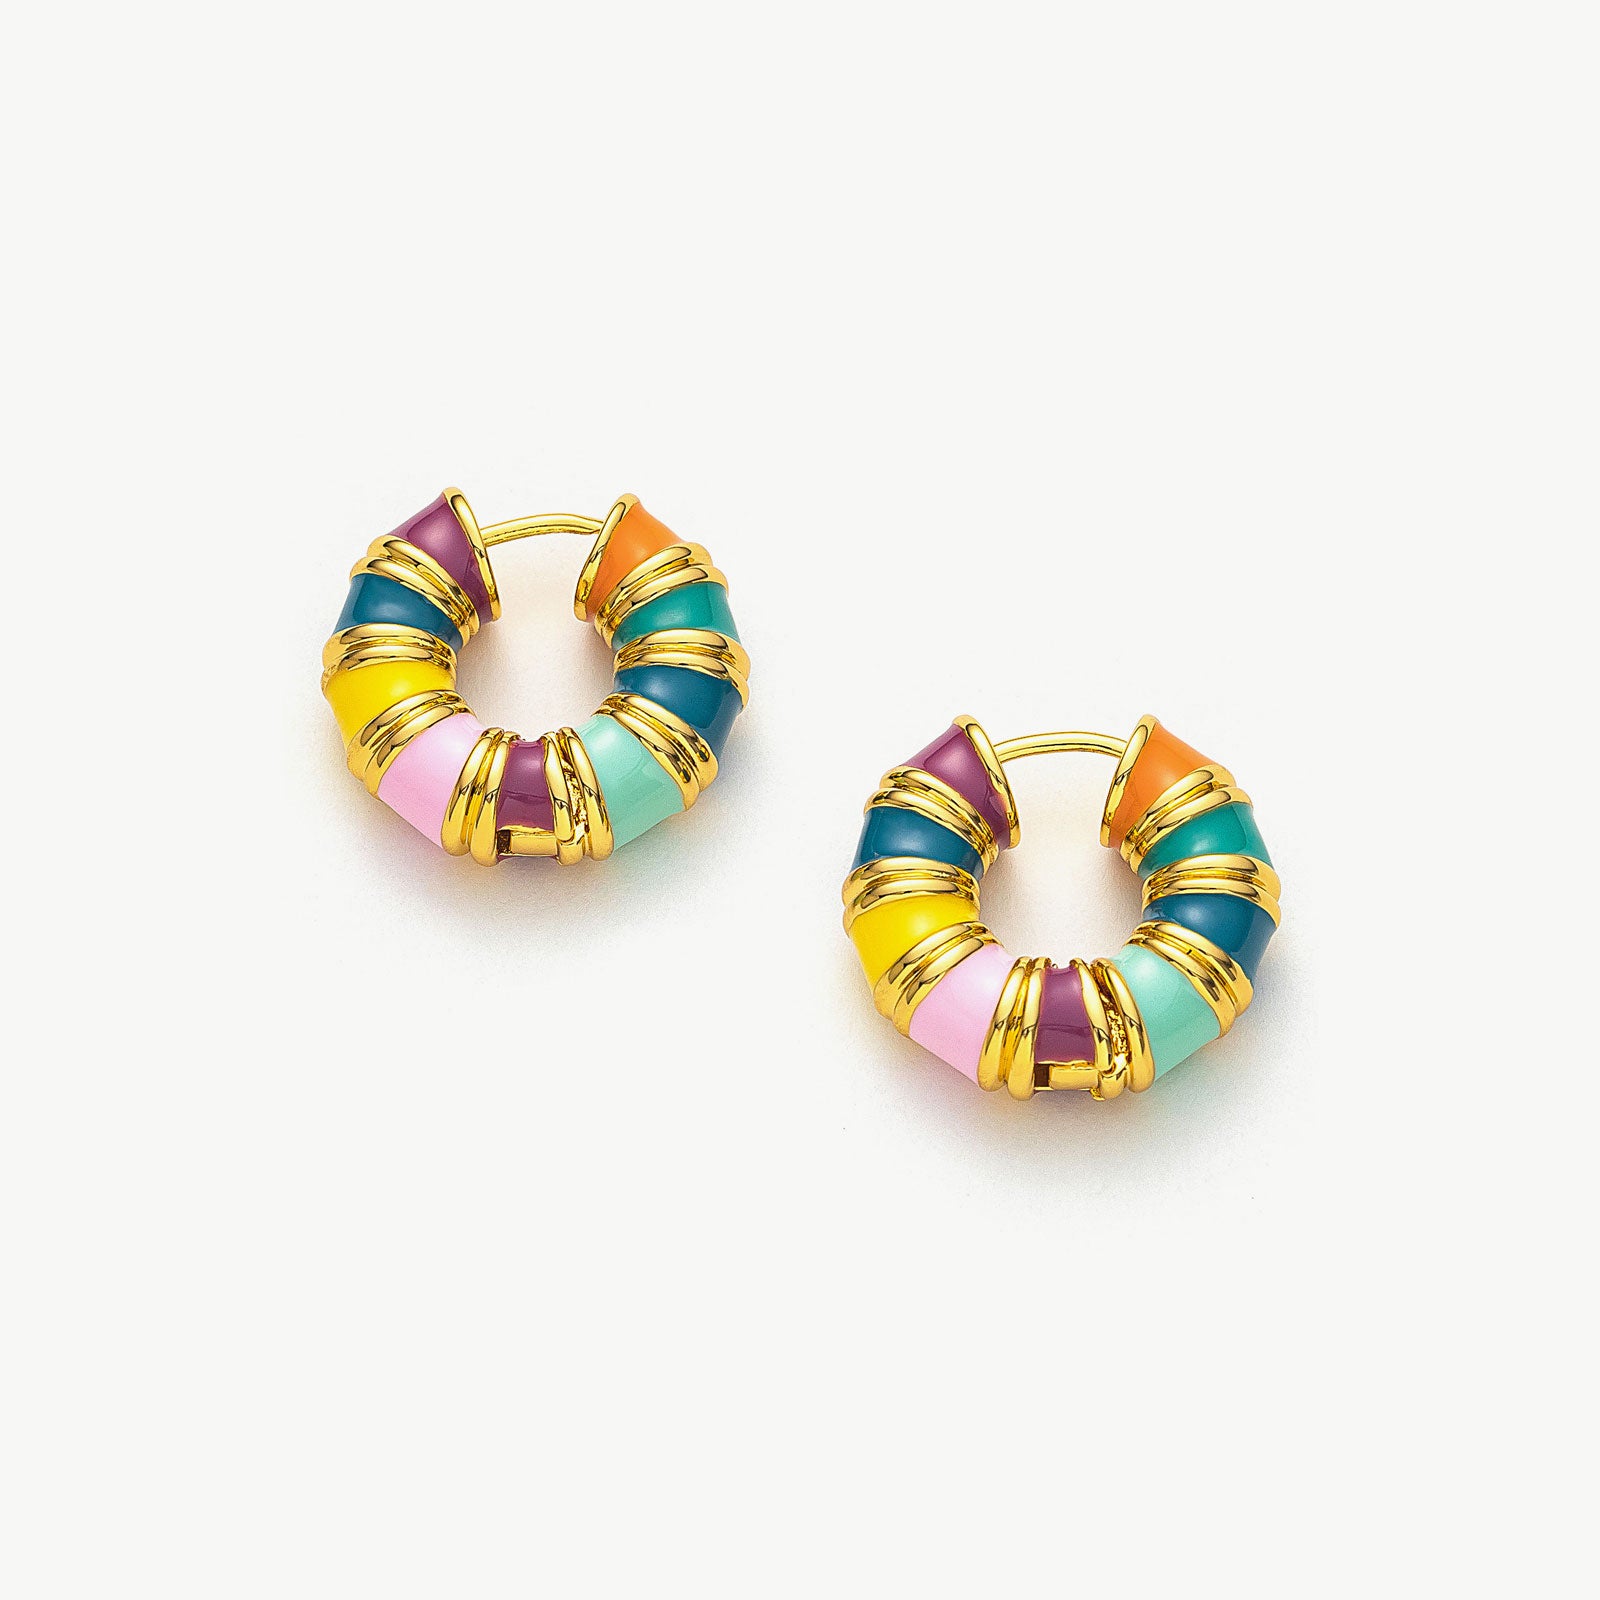 Multicolor Hoop Earrings, a lively and vibrant accessory featuring a playful array of colors for a cheerful and festive look